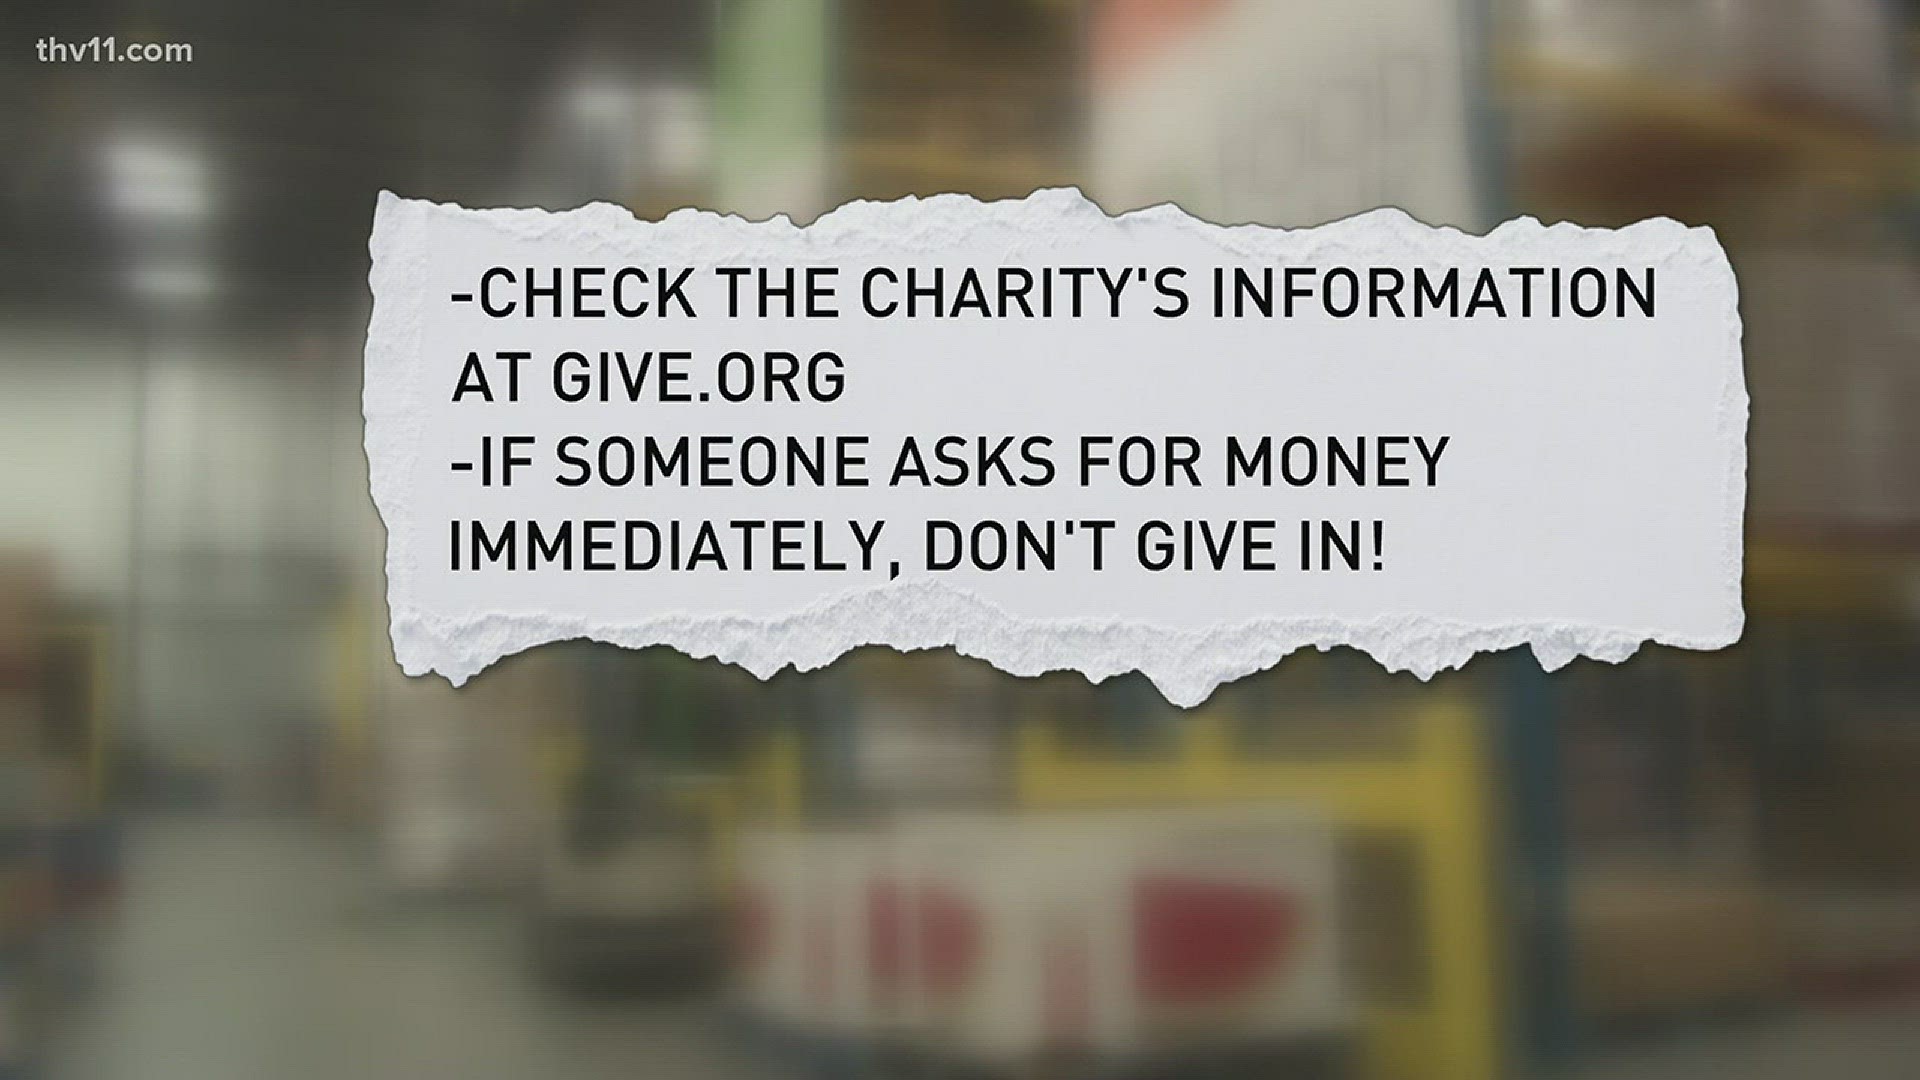 People looking to give to charities should be wary of charity scammers around this time of year